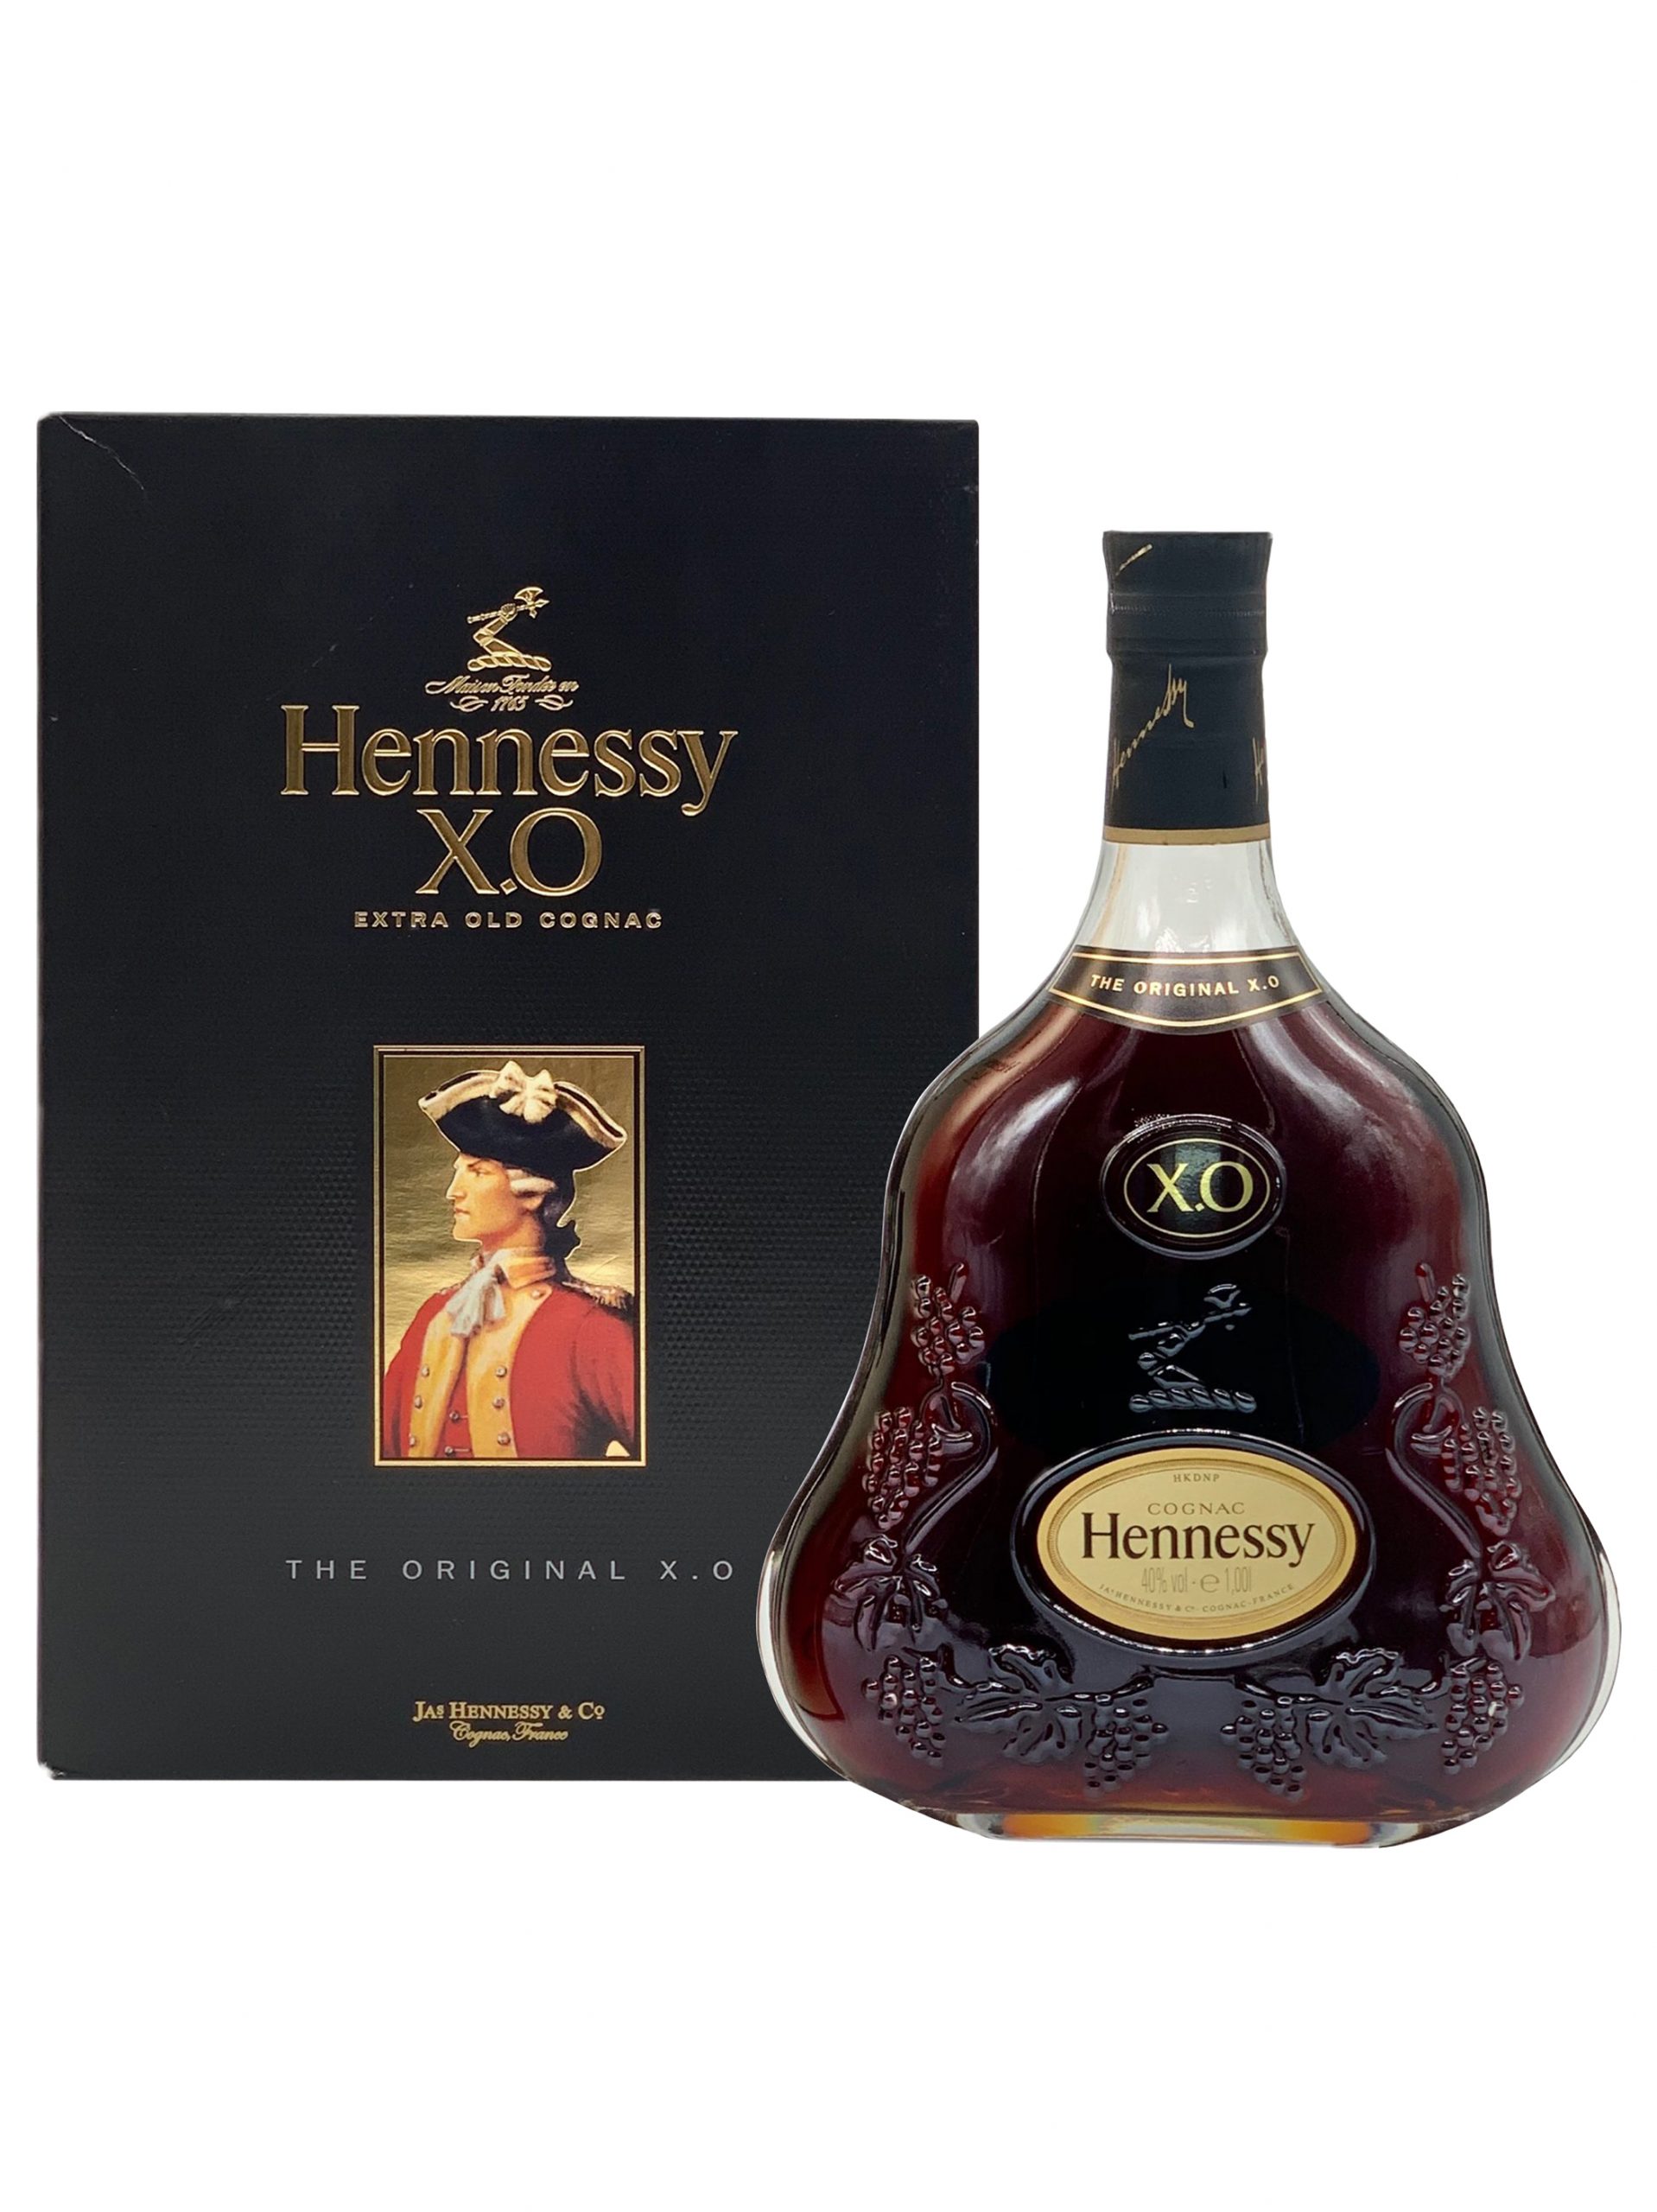 HENNESSY X.O EXTRA OLD COGNAC│1L